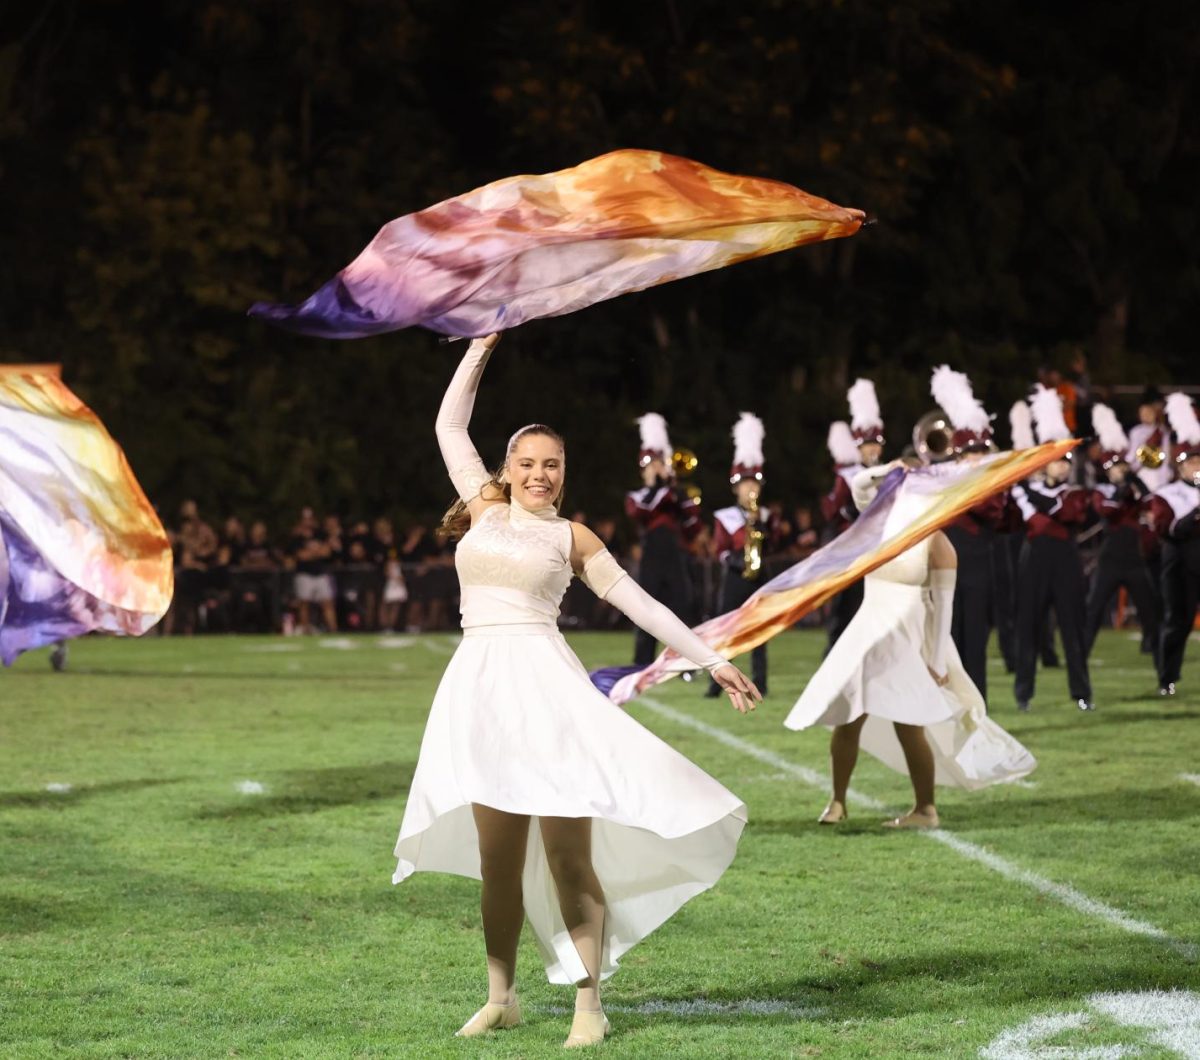 Junior Renee Vig extravagantly twirls her flag during the bands show.